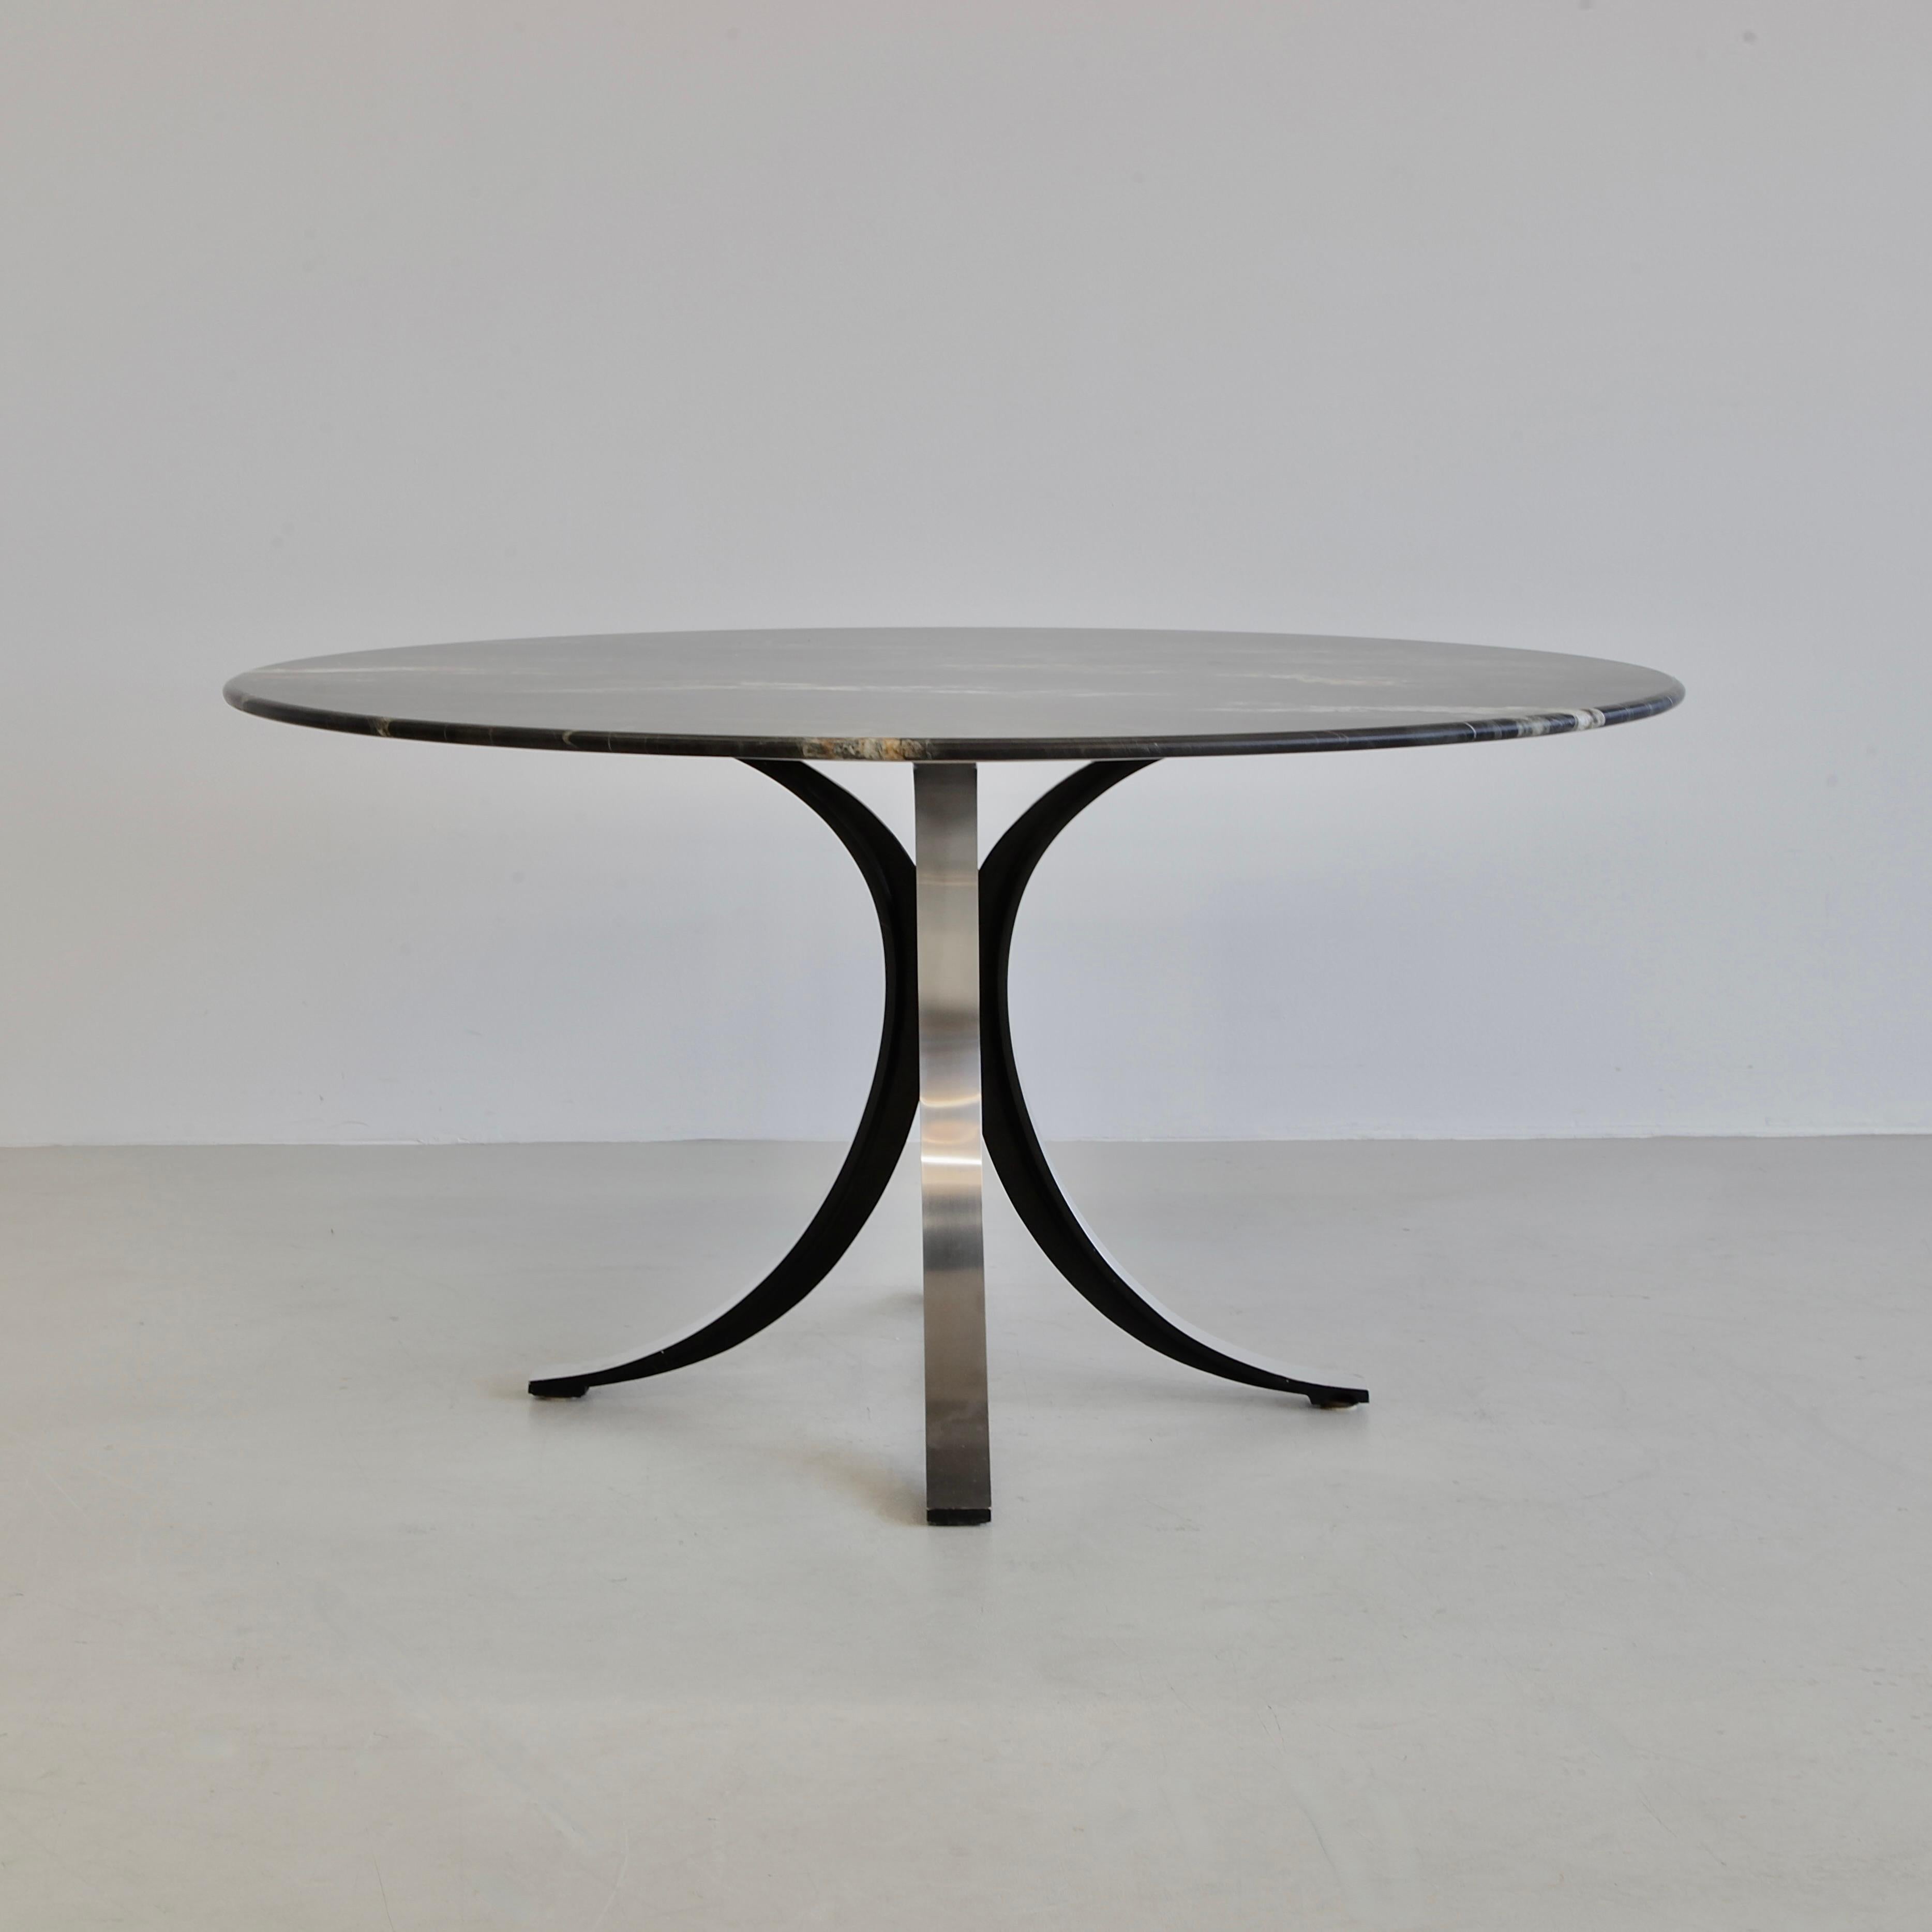 Round Marble Dining Table (T69A) designed by Osvaldo Borsani and Eugenio Gerli i In Good Condition For Sale In Berlin, Berlin